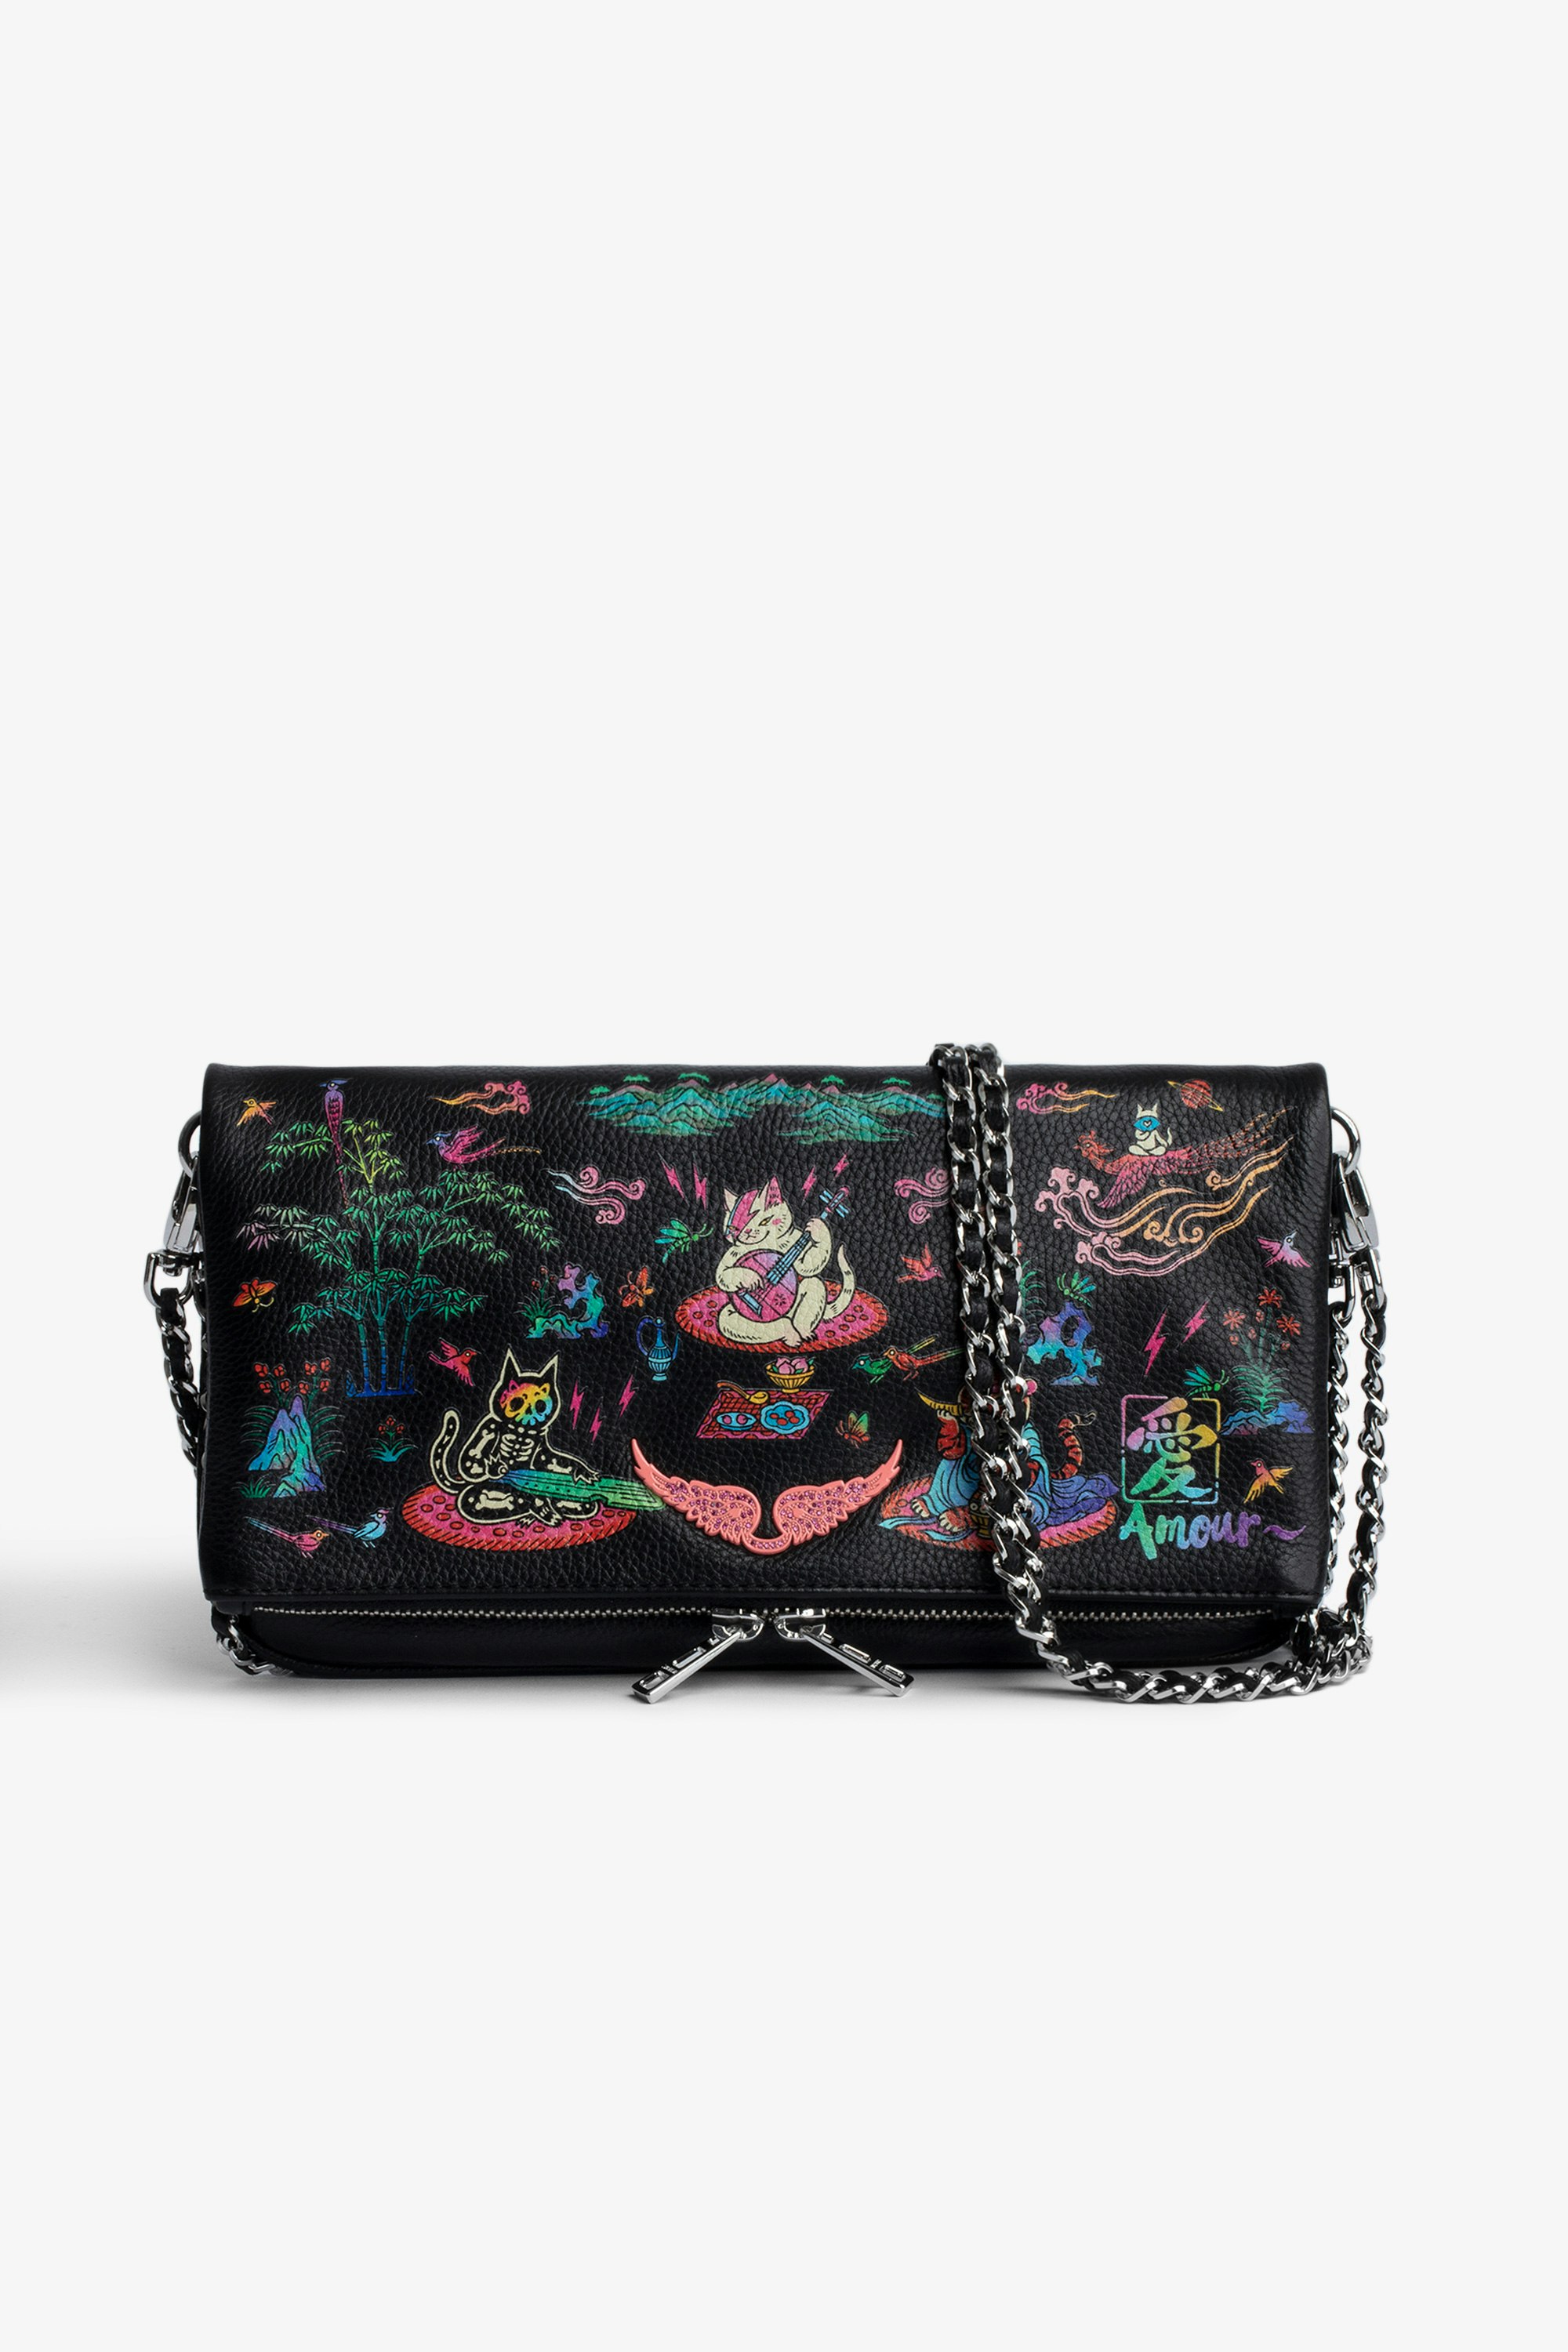 Rock Art Print クラッチバッグ Women’s black leather clutch with exclusive print for the brand’s 25th anniversary 